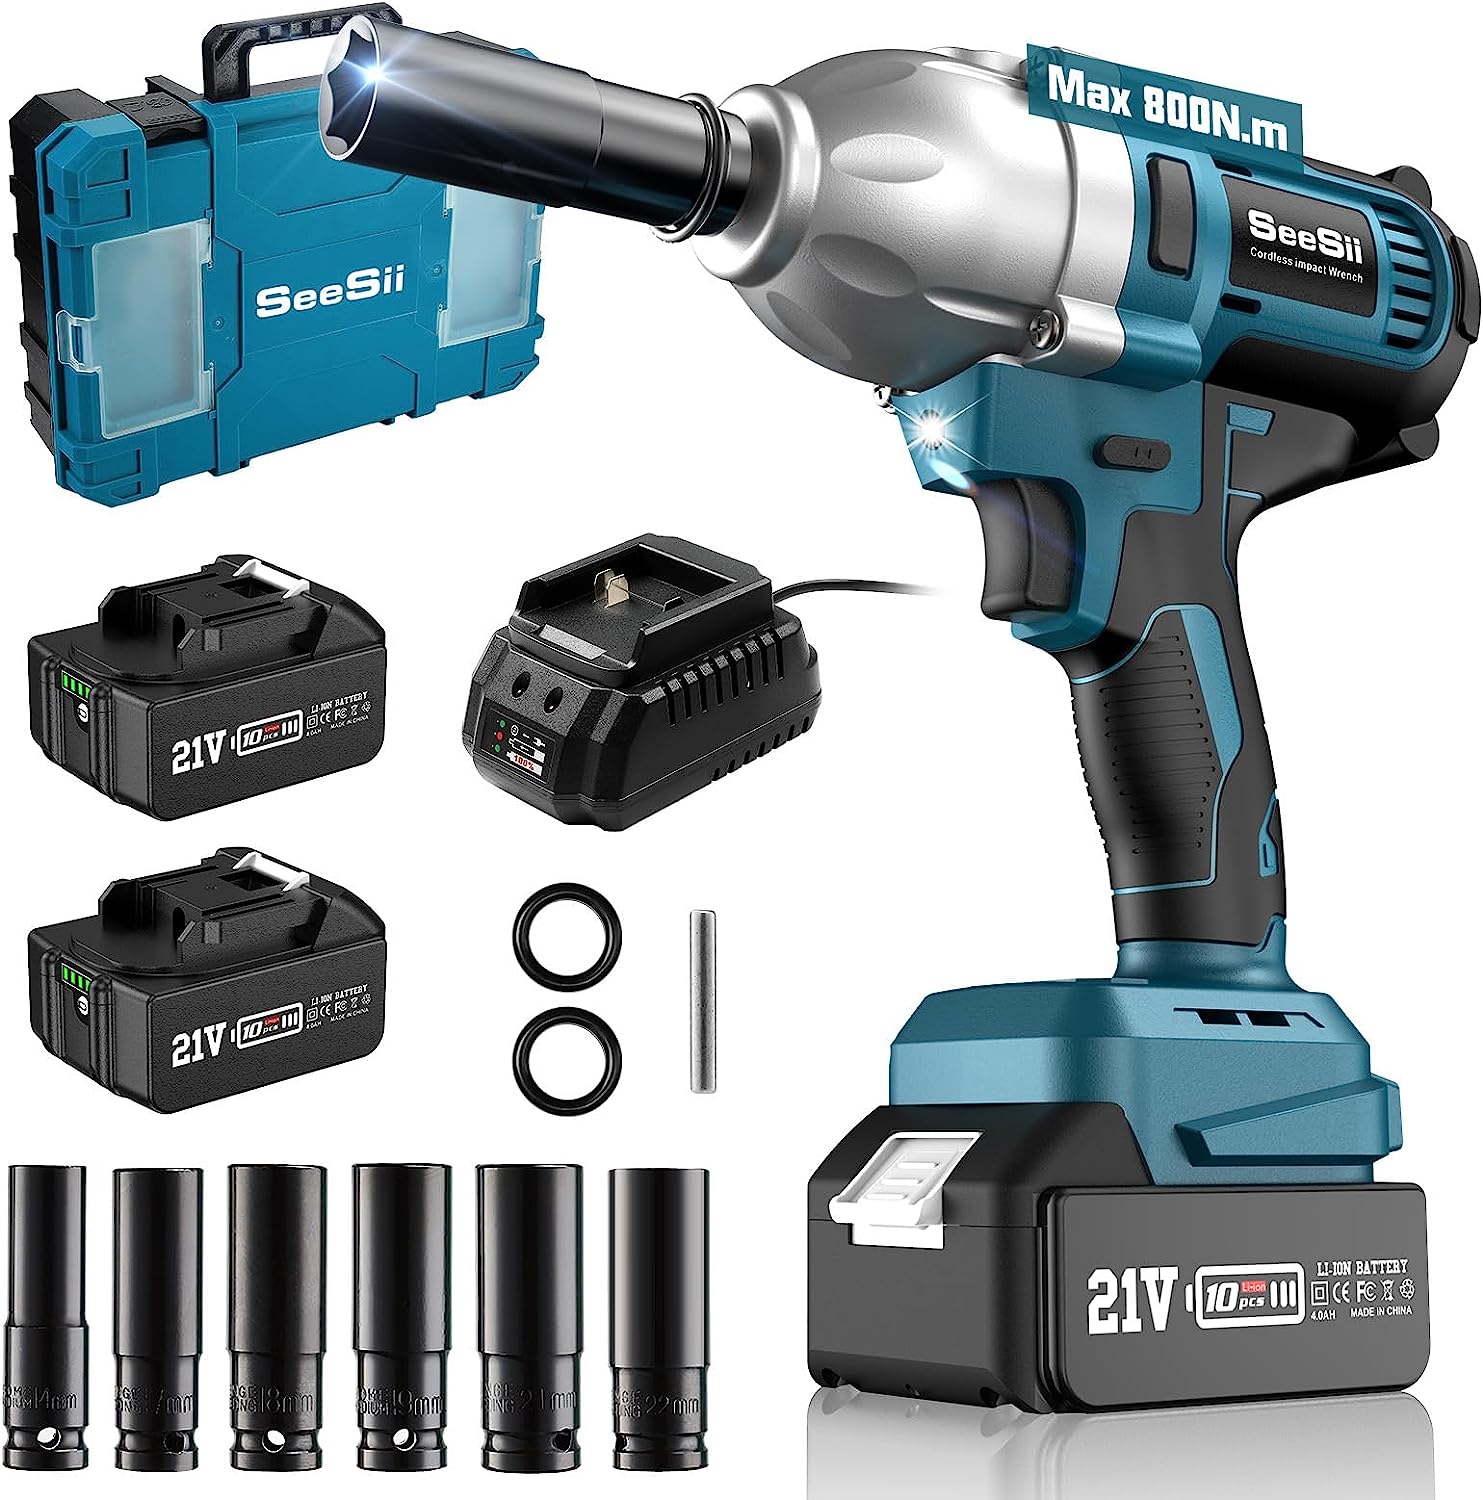 Seesii Cordless Impact Wrench, 580Ft-lbs(800N.m) [...]